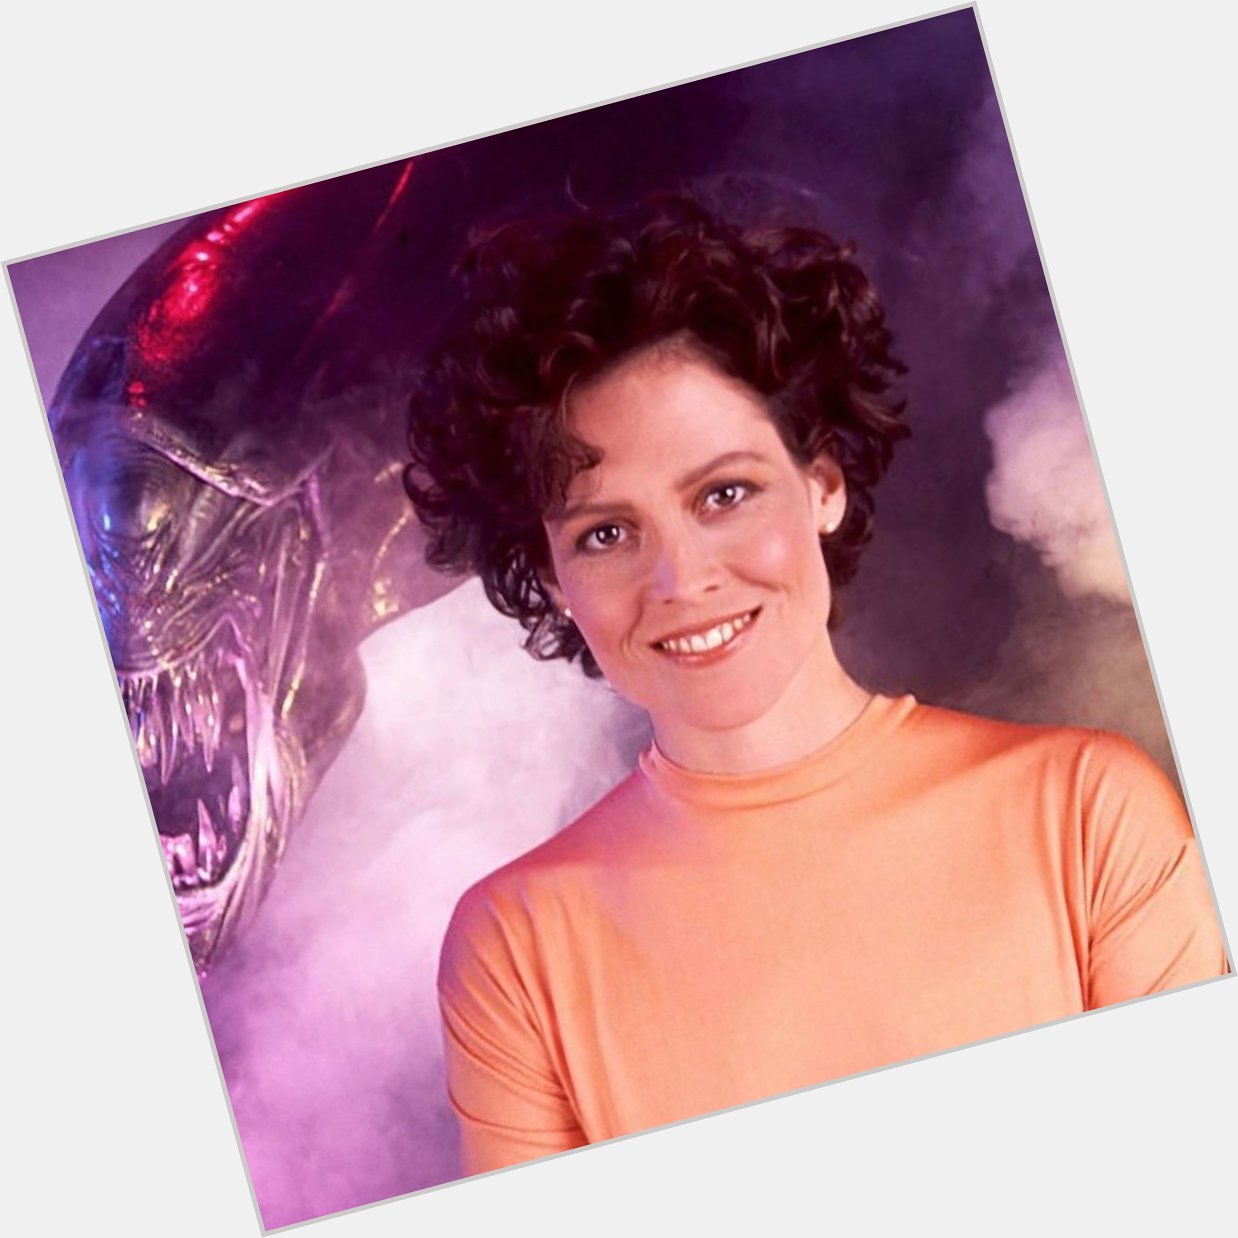 Happy Birthday to the real Queen of the Alien franchise, Sigourney Weaver! 